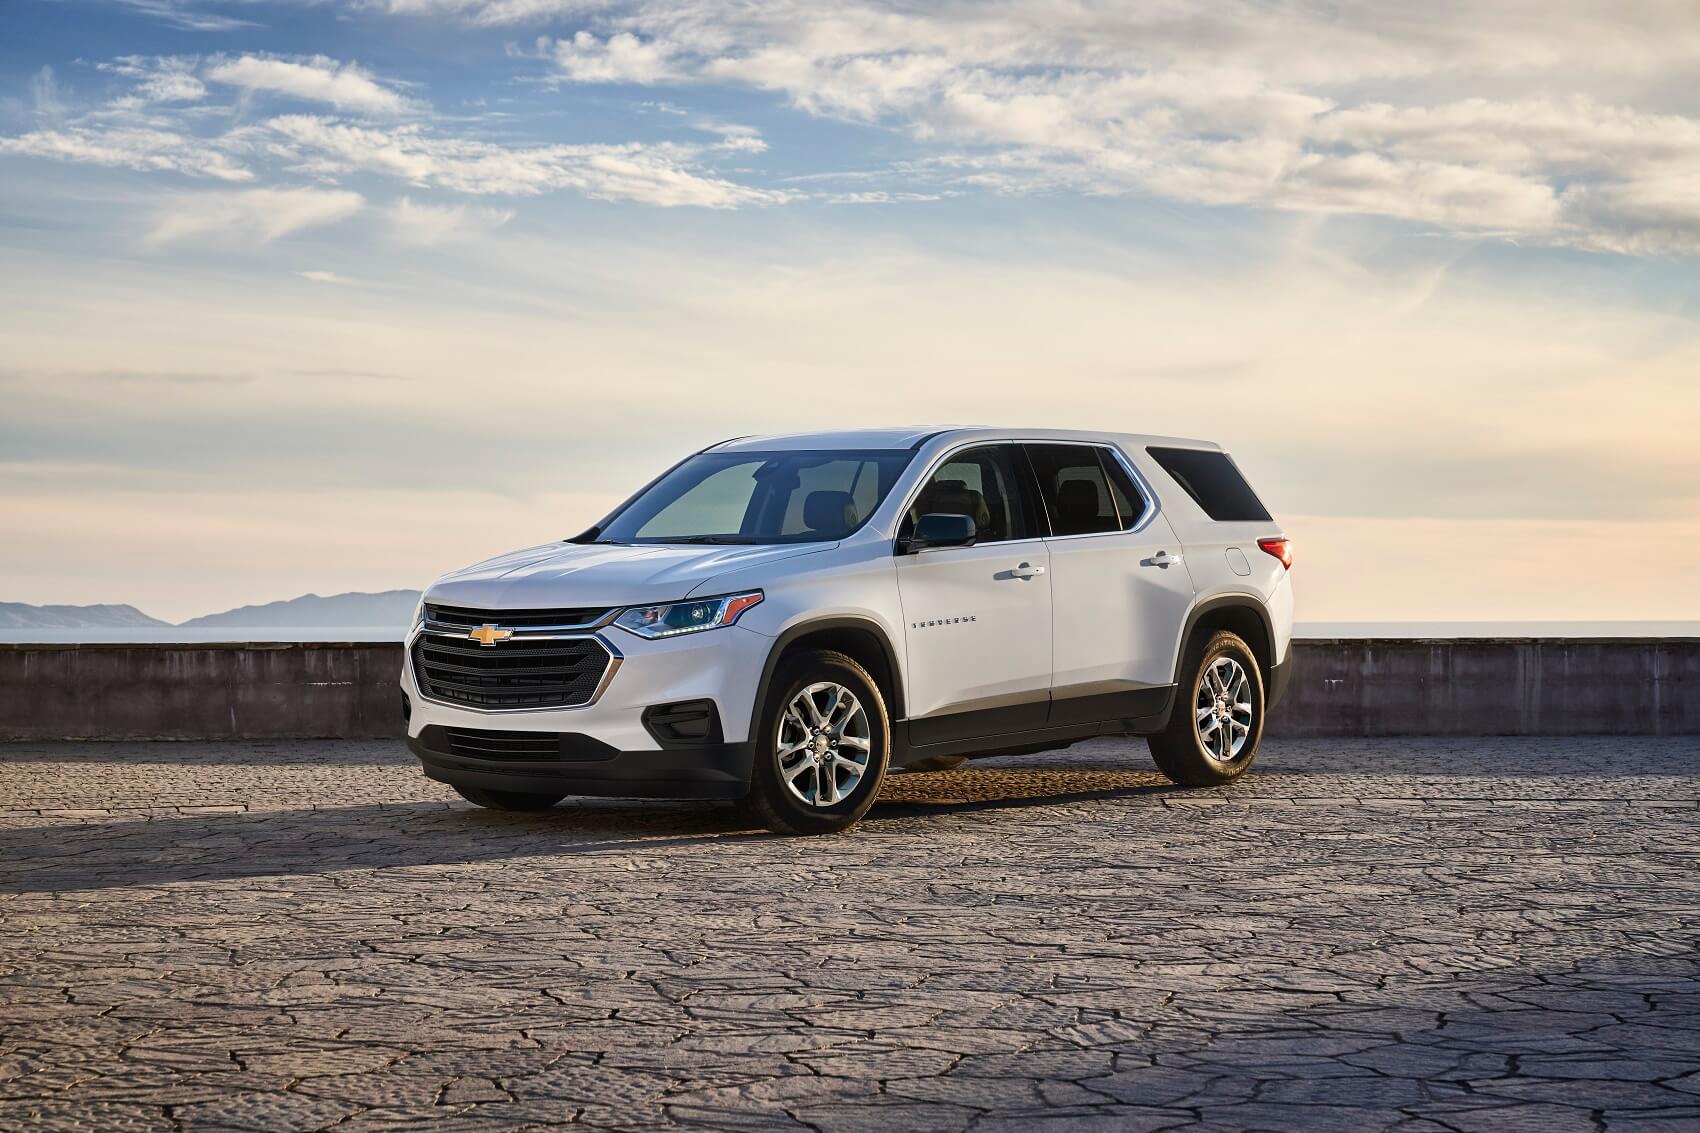 2021 Chevy Traverse Dimensions Indianapolis IN